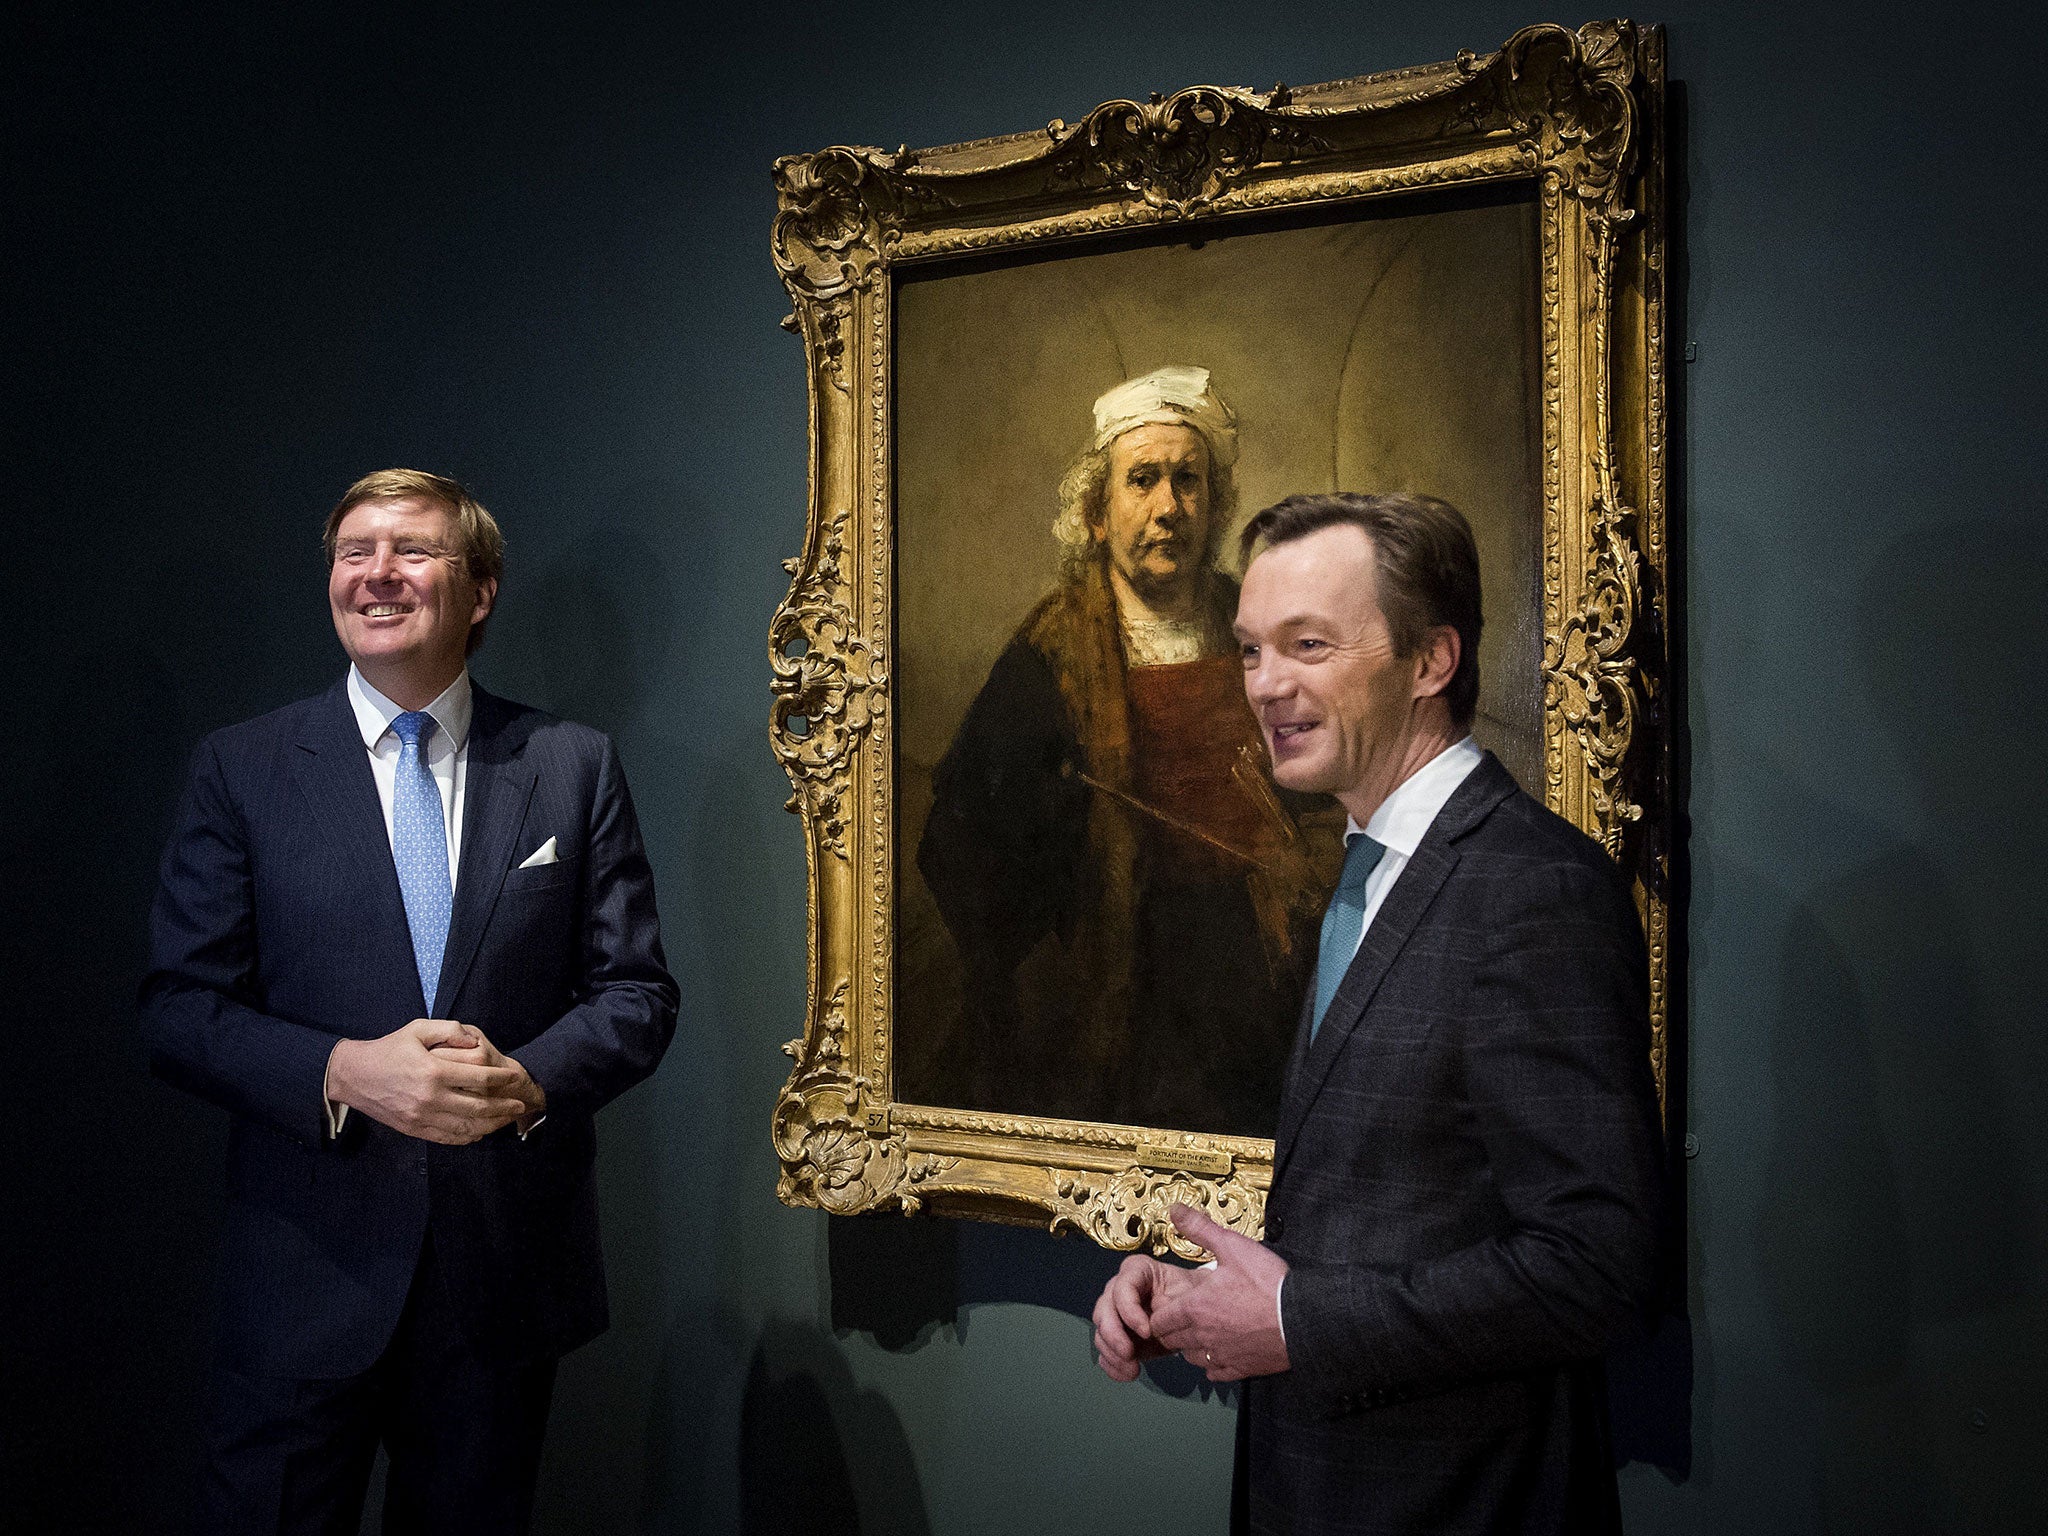 Dutch King Willem Alexander (L) and museum director Wim Pijbes (R) pose beside a painting entitled 'Self Portrait with two circles' by Dutch master Rembrandt during the official opening of the new exhibition of late works by Rembrandt at the Rijksmuseum in Amsterdam on February 12, 2015.